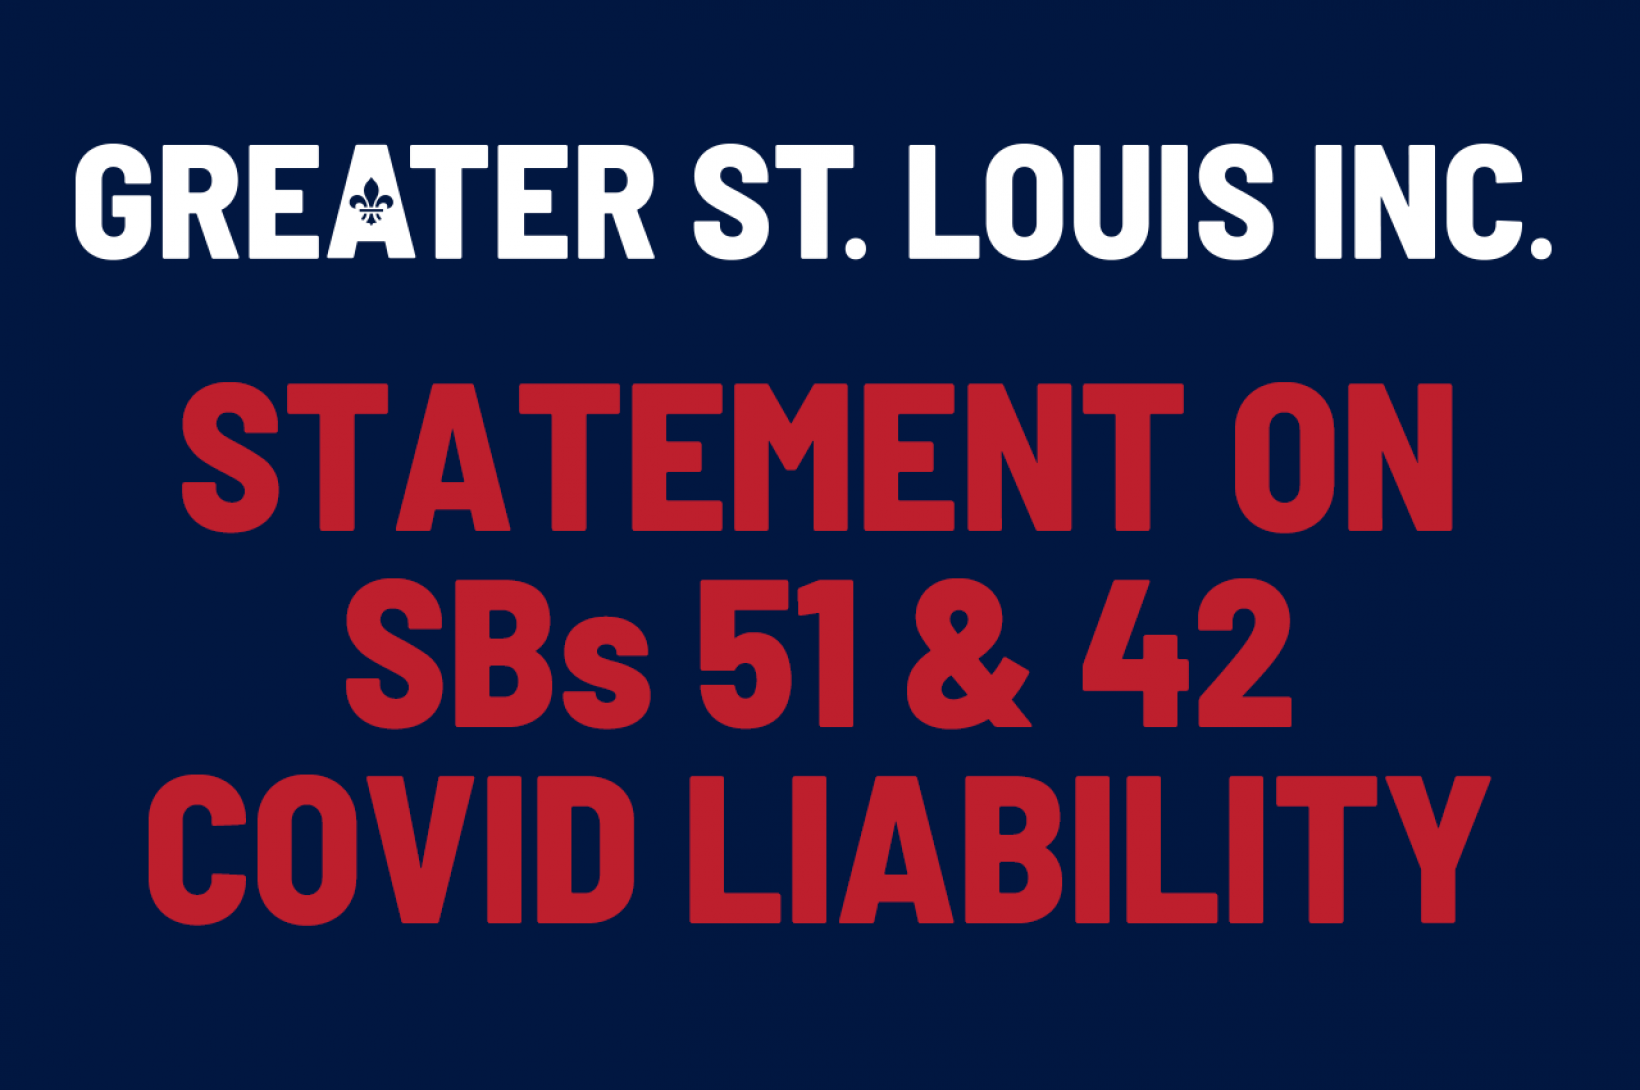 Greater St. Louis Inc. Statement on SBs 51 & 42 COVID Liability